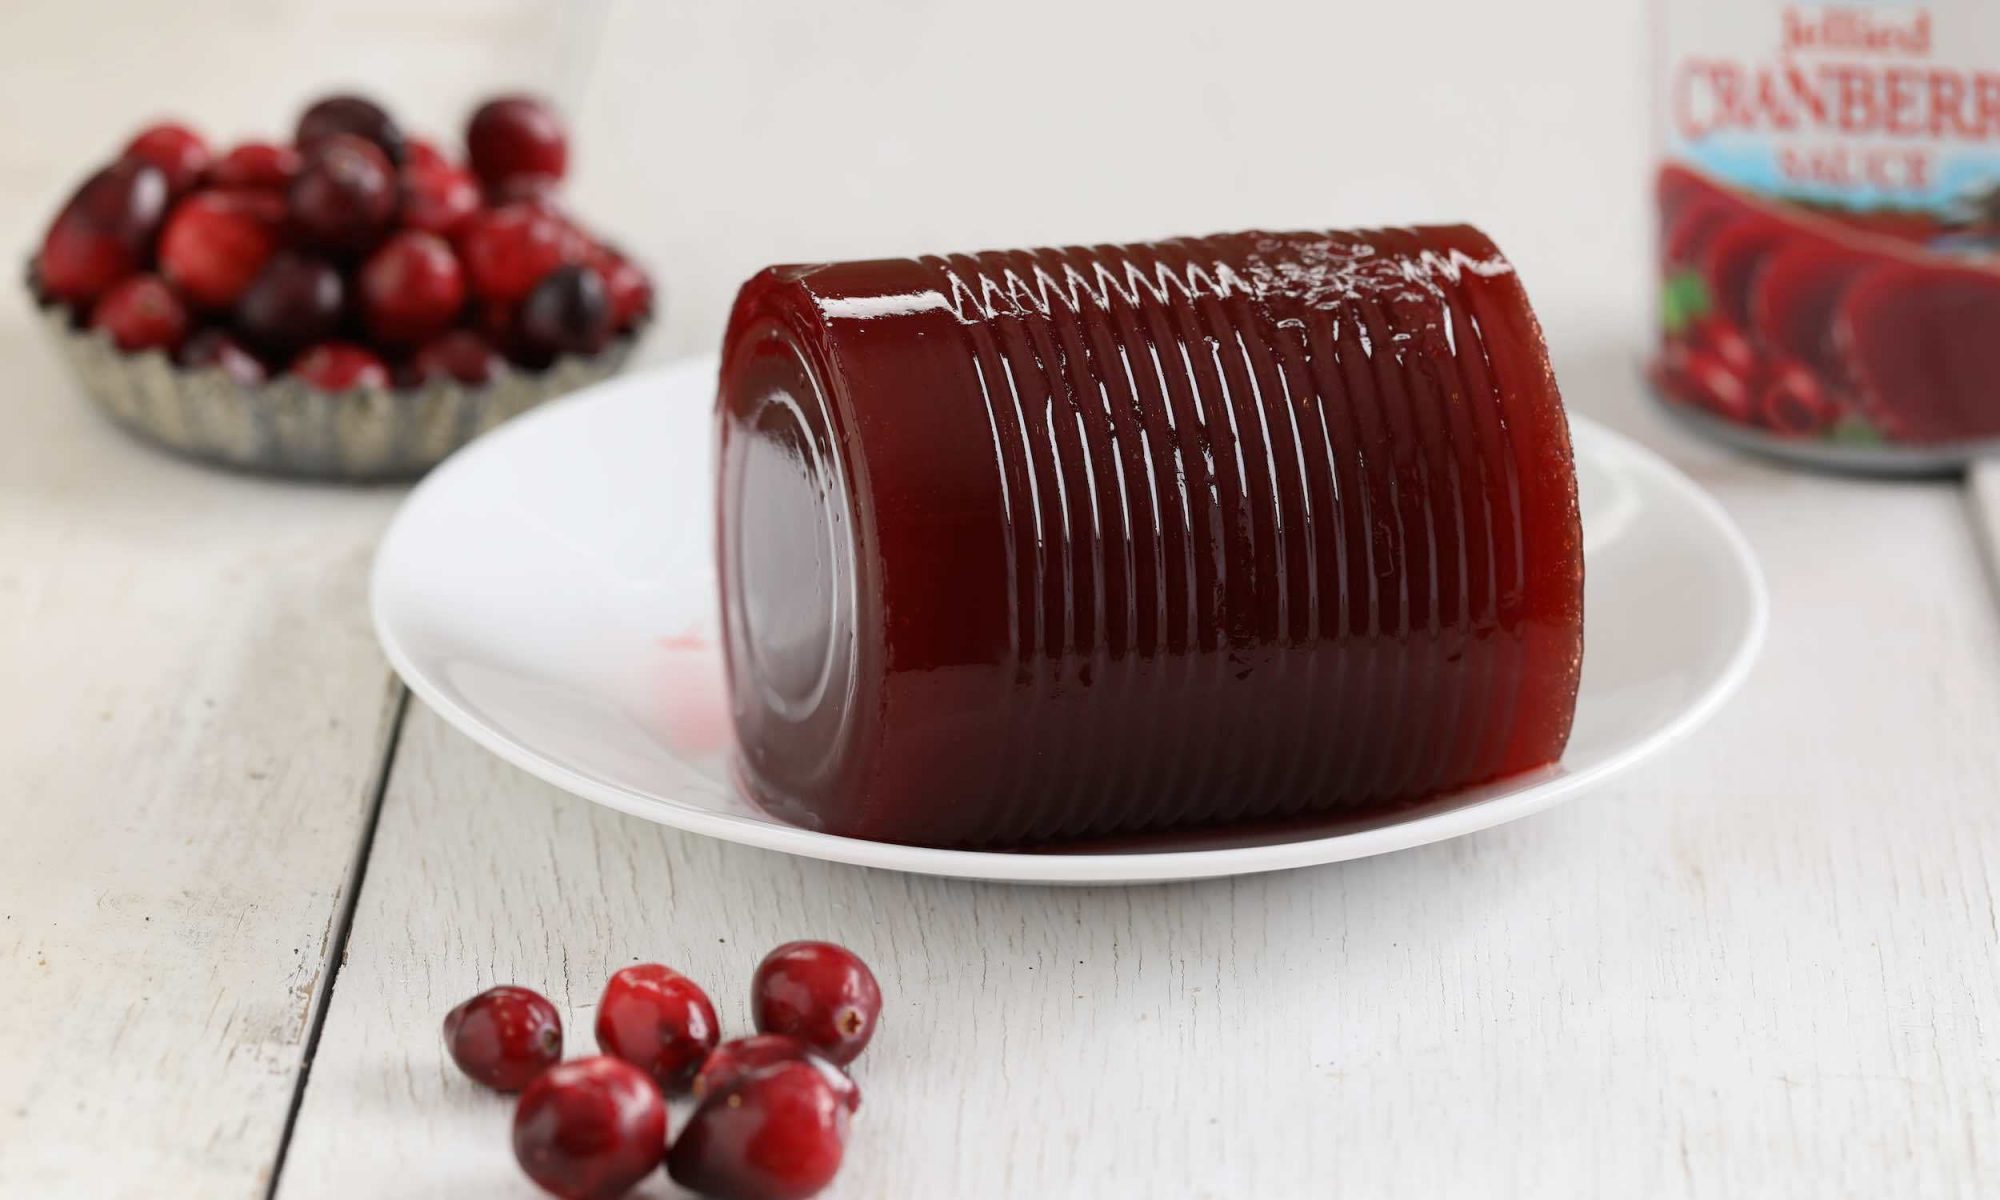 How To Serve Canned Cranberry Sauce